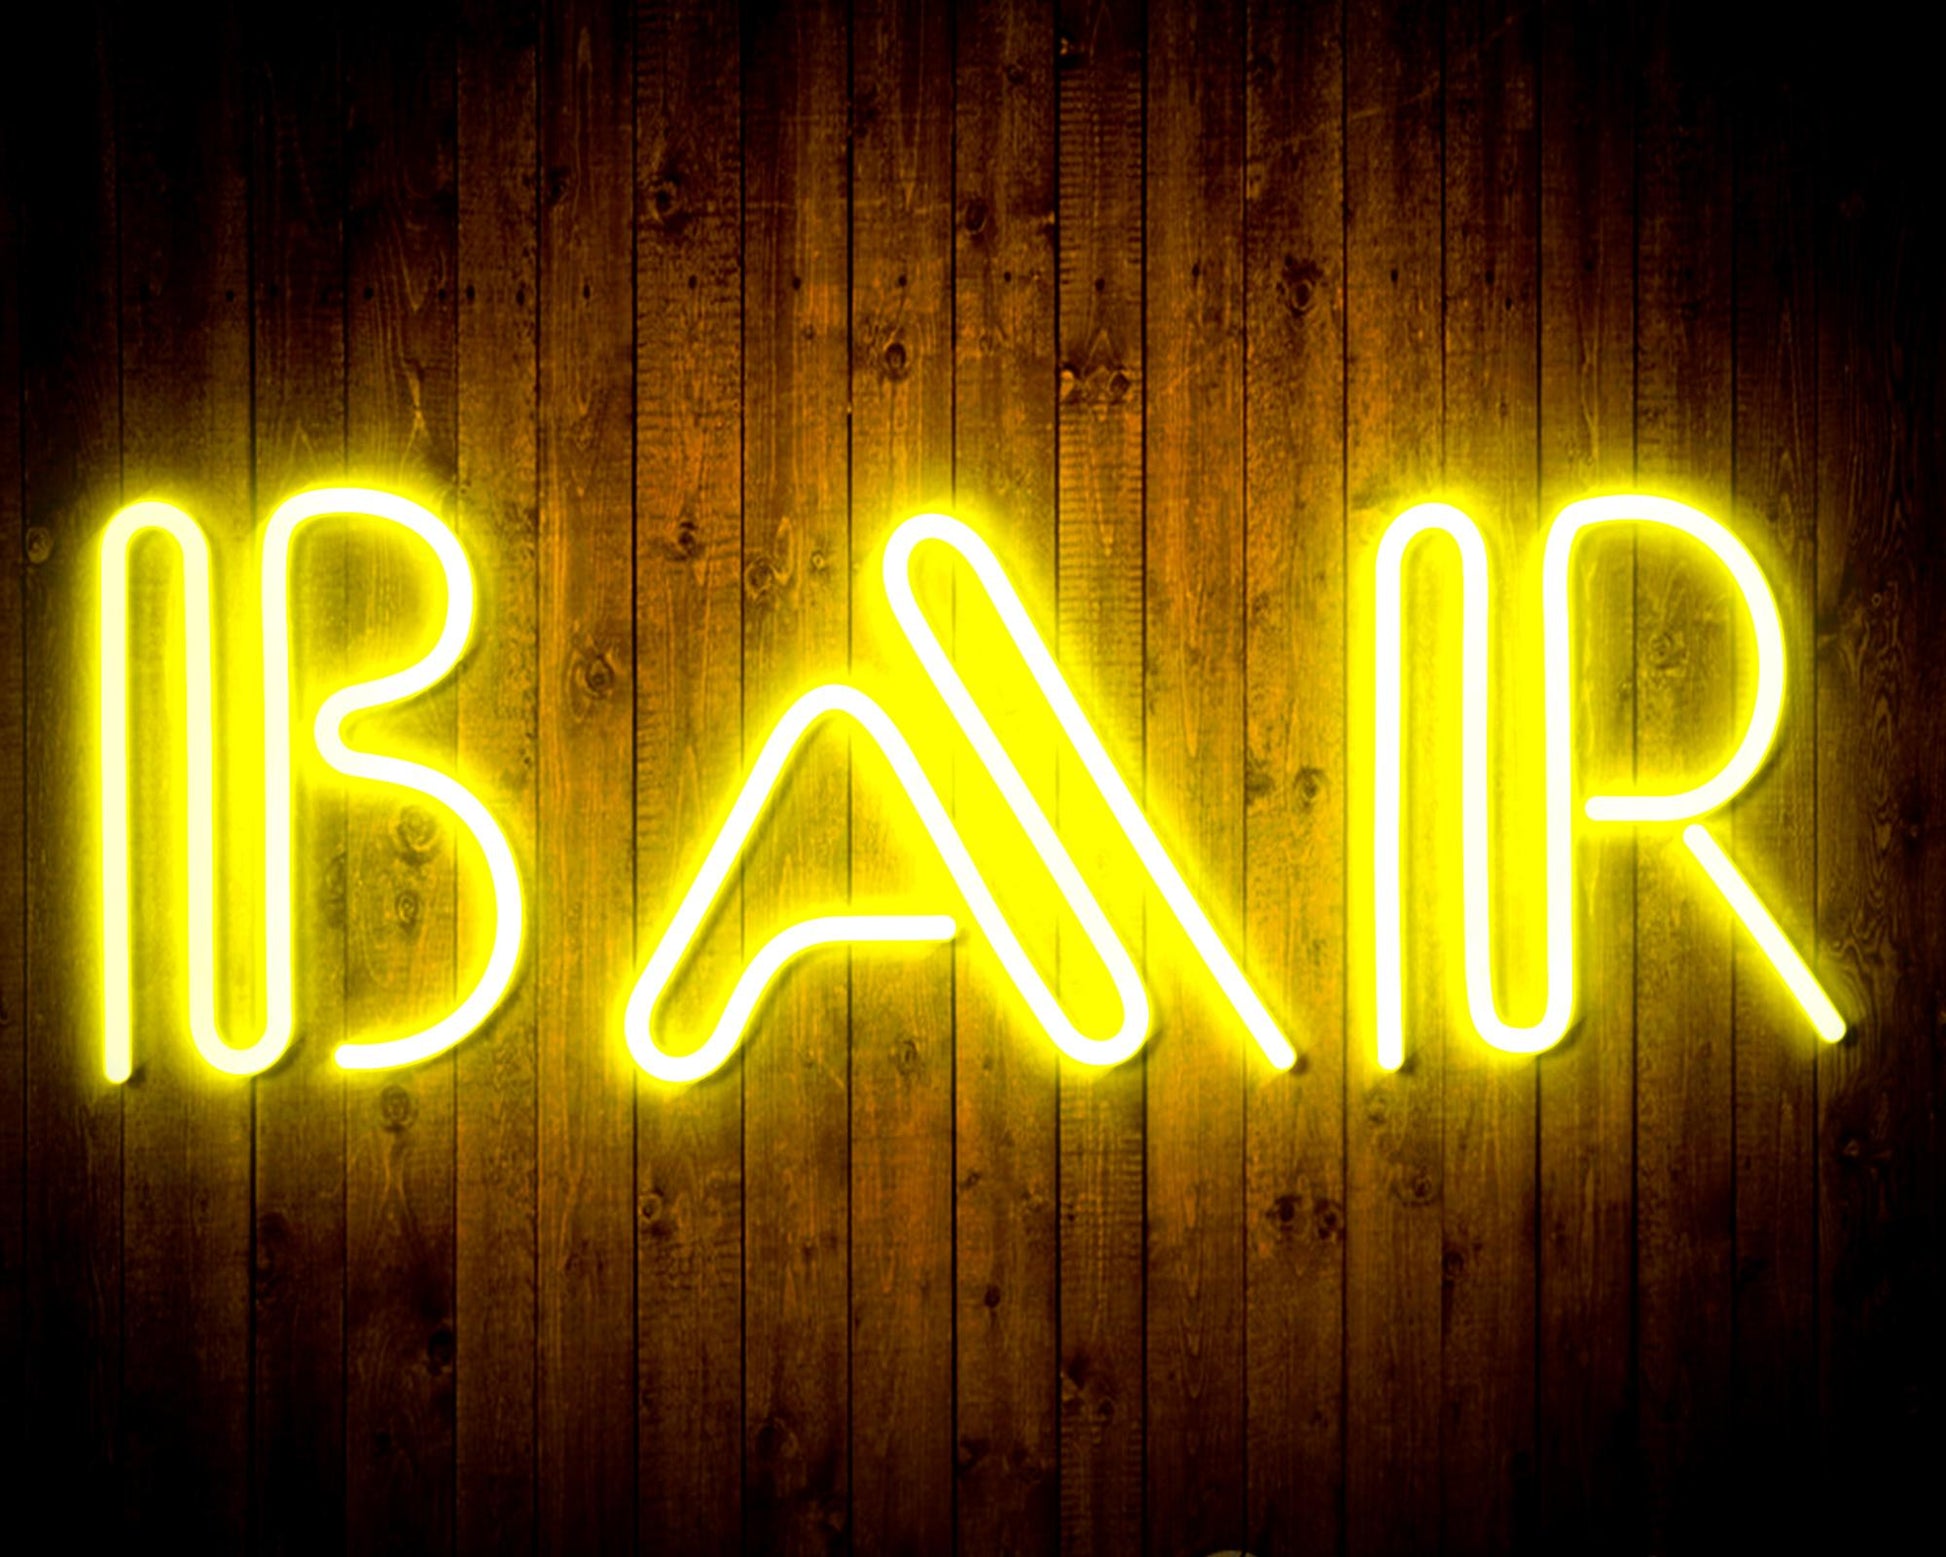 Bar Sign Flex Silicone LED Neon Sign - Way Up Gifts